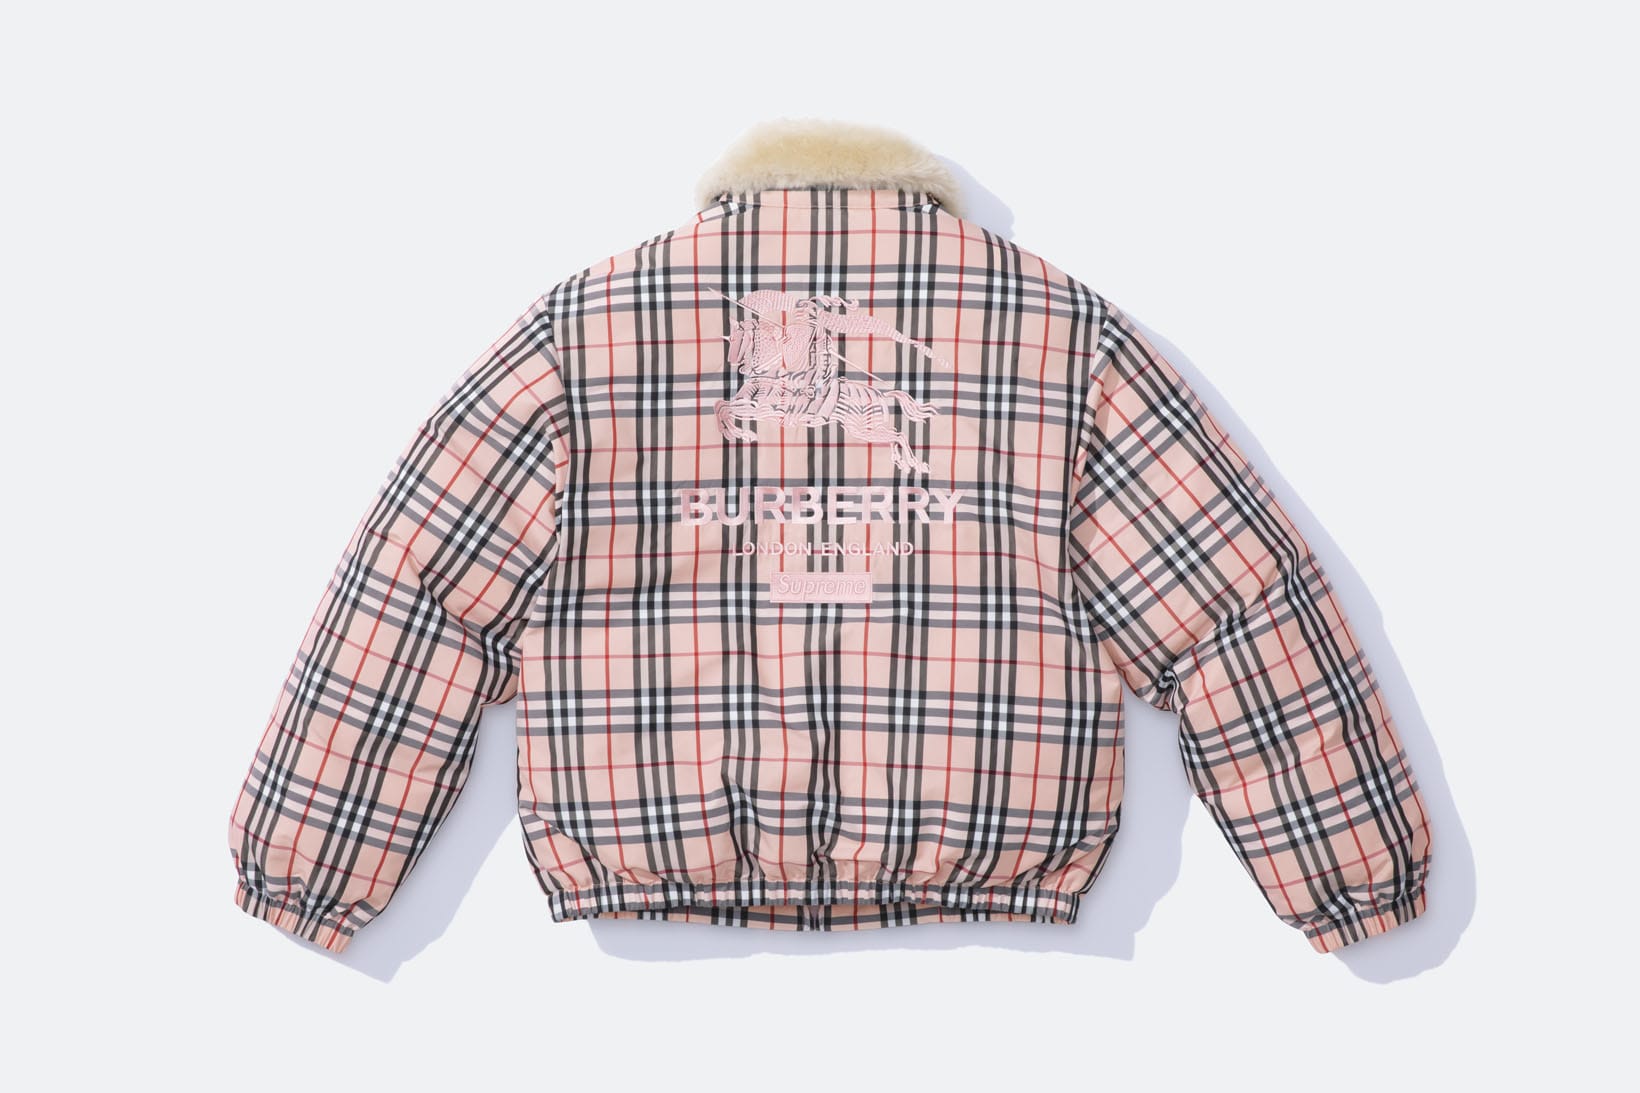 Burberry x Supreme Collaboration Official Images | HYPEBAE